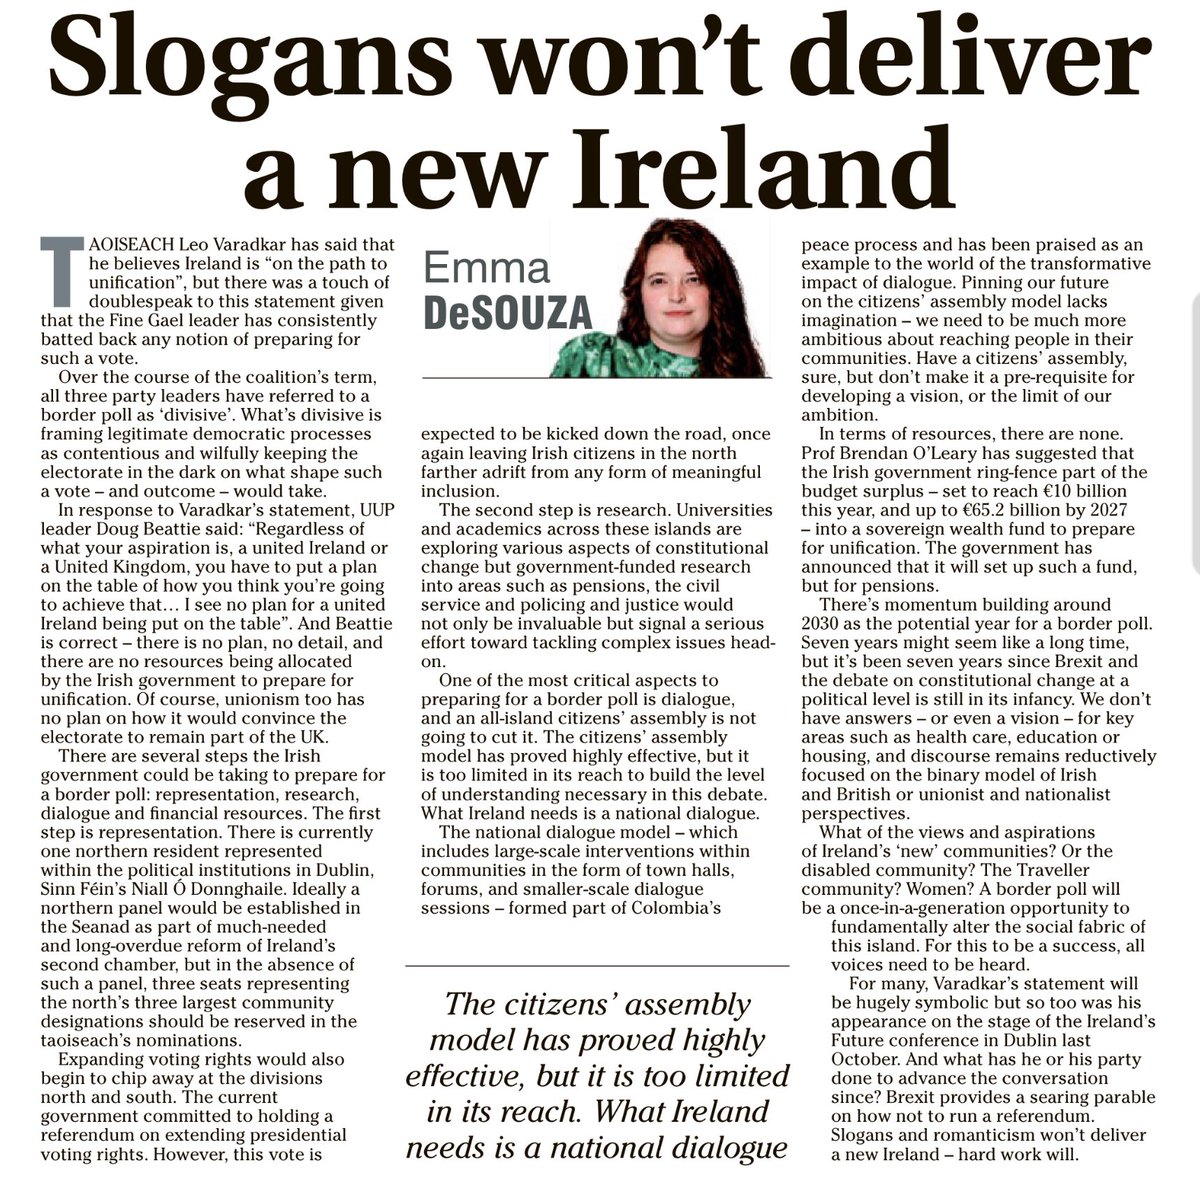 “Universities and academics across these islands are exploring various aspects of constitutional change but government funded research … would not only be invaluable but signal a serious effort toward tackling complex issues head-on.” ~Emma DeSouza, The Irish News ☕️🥐